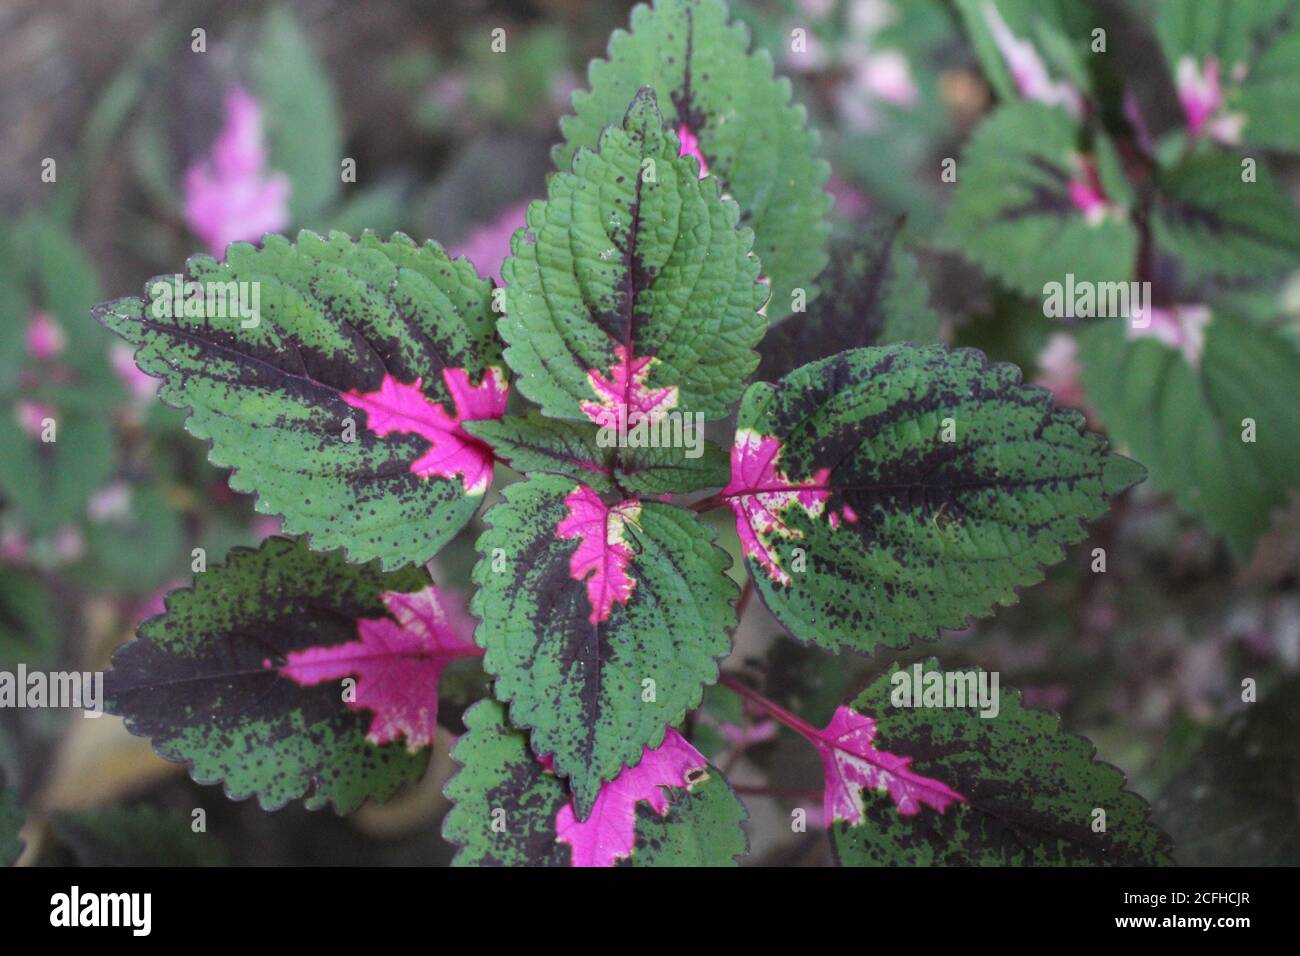 Multi colored leaves pink,purple and green color leaves growing in garden Stock Photo